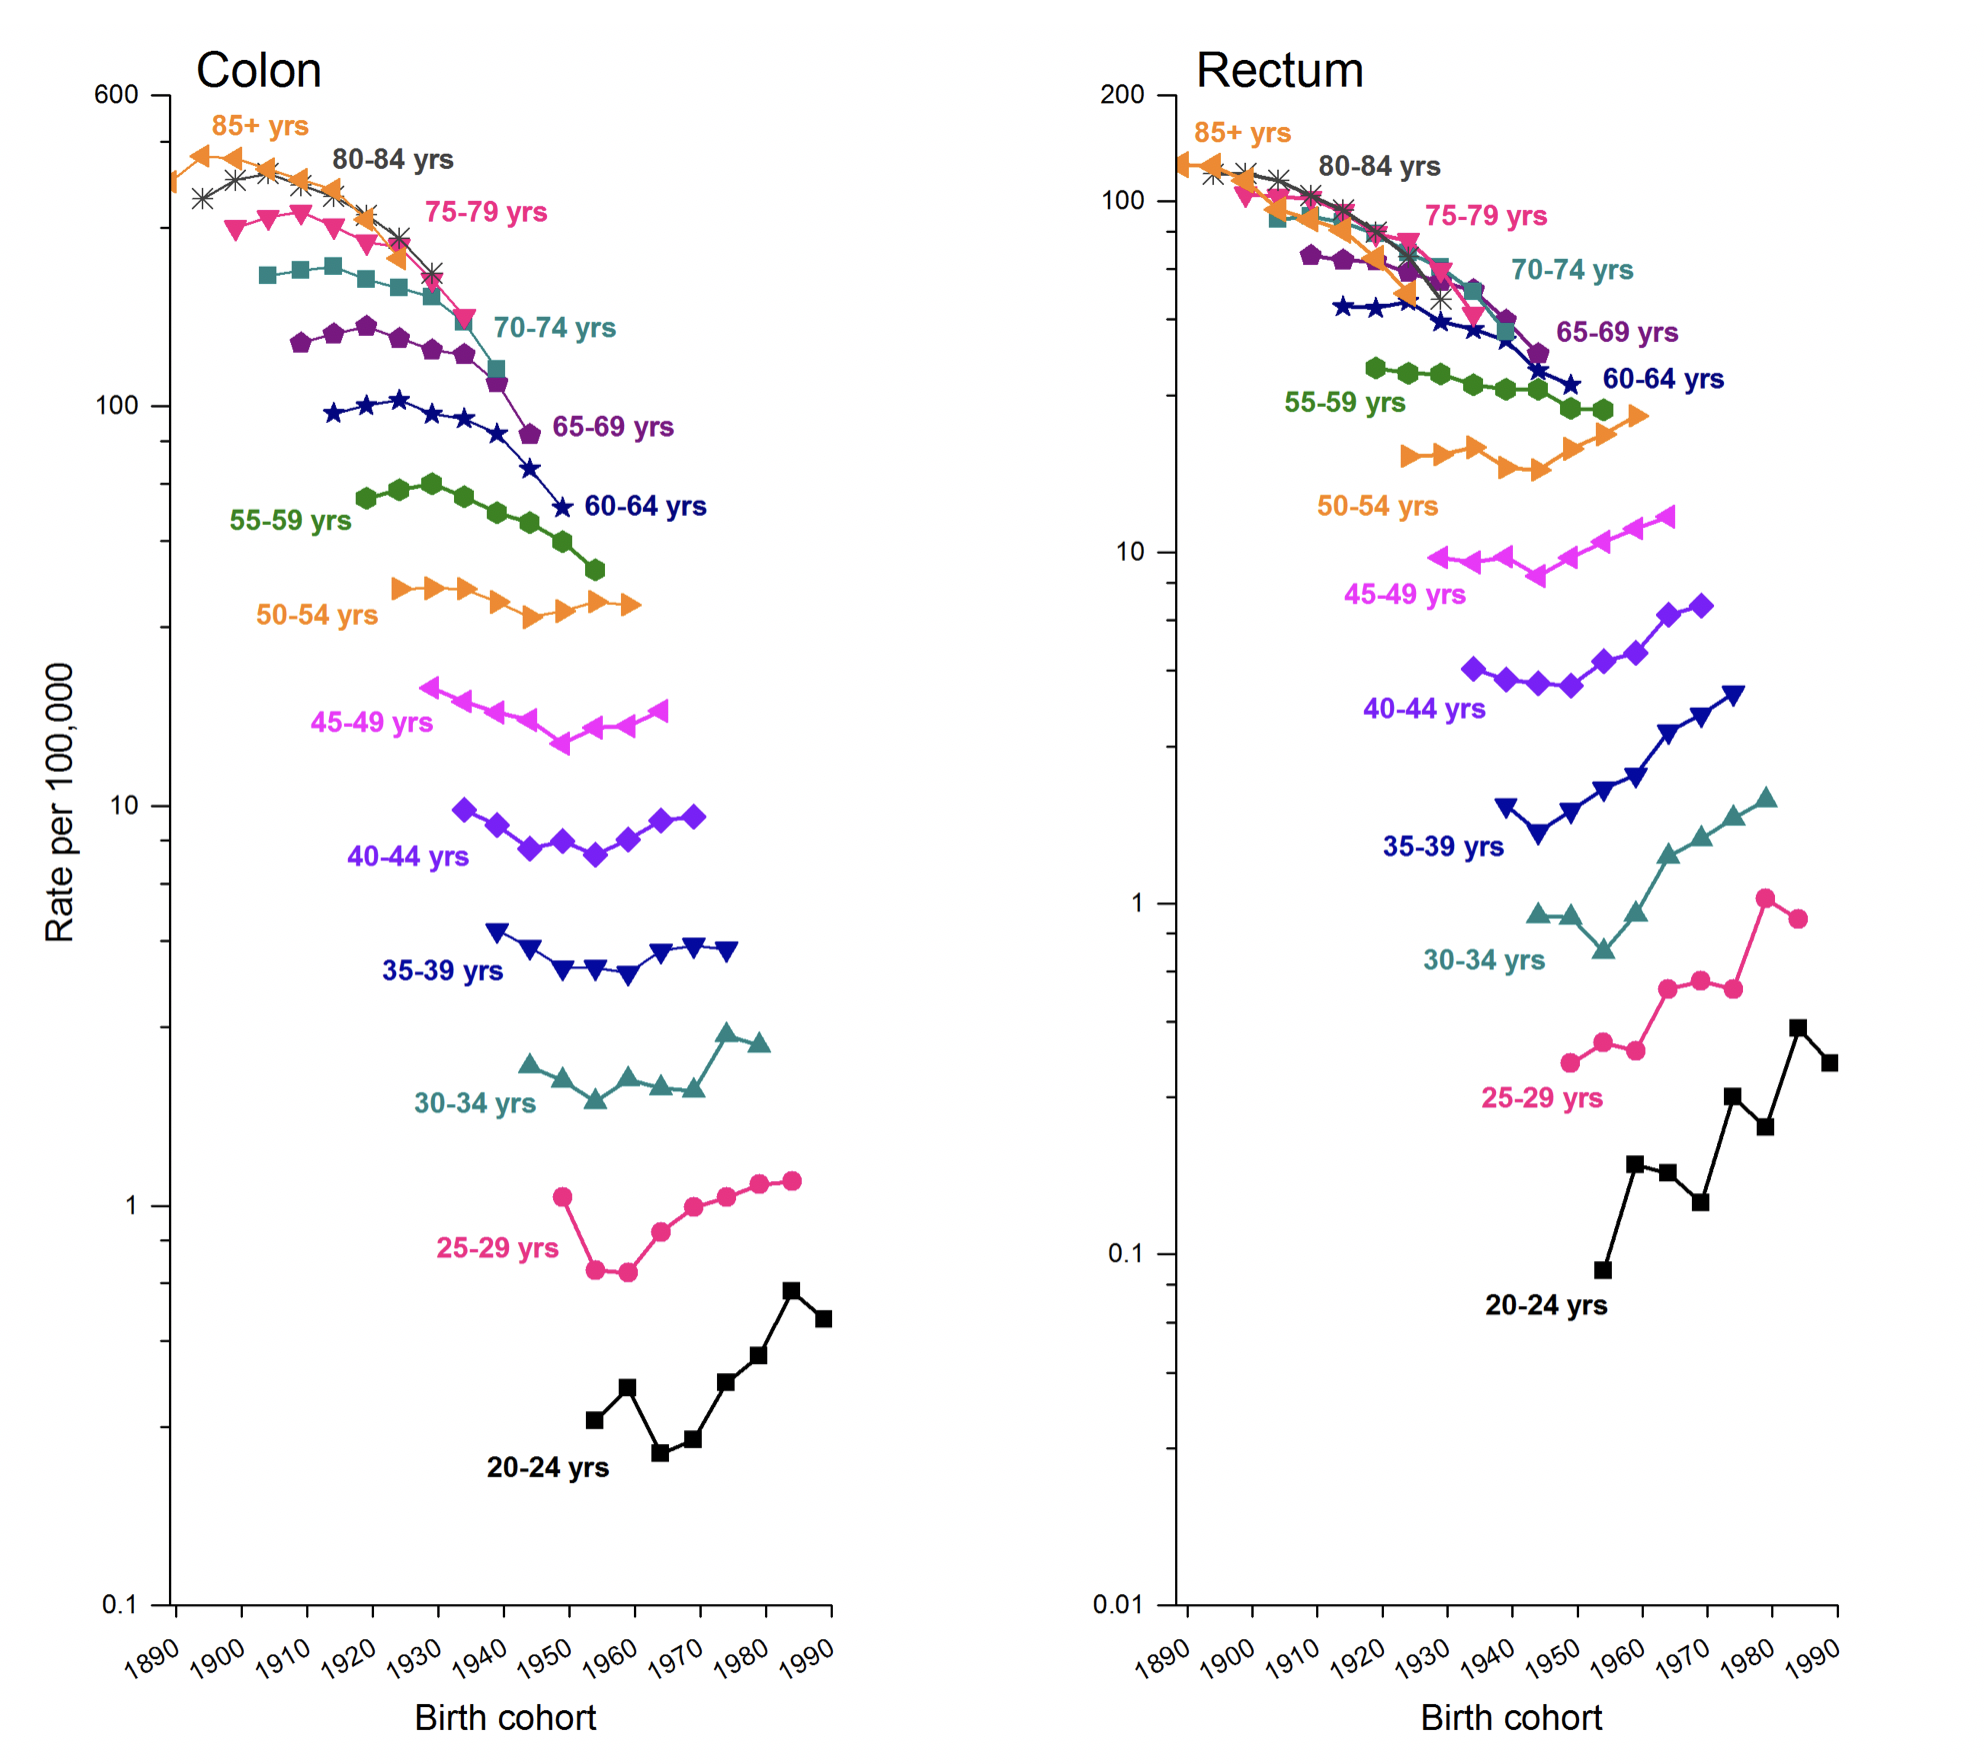 Trends in age-specific colon and rectal cancer incidence rates by year of birth, U.S., 1974-2013